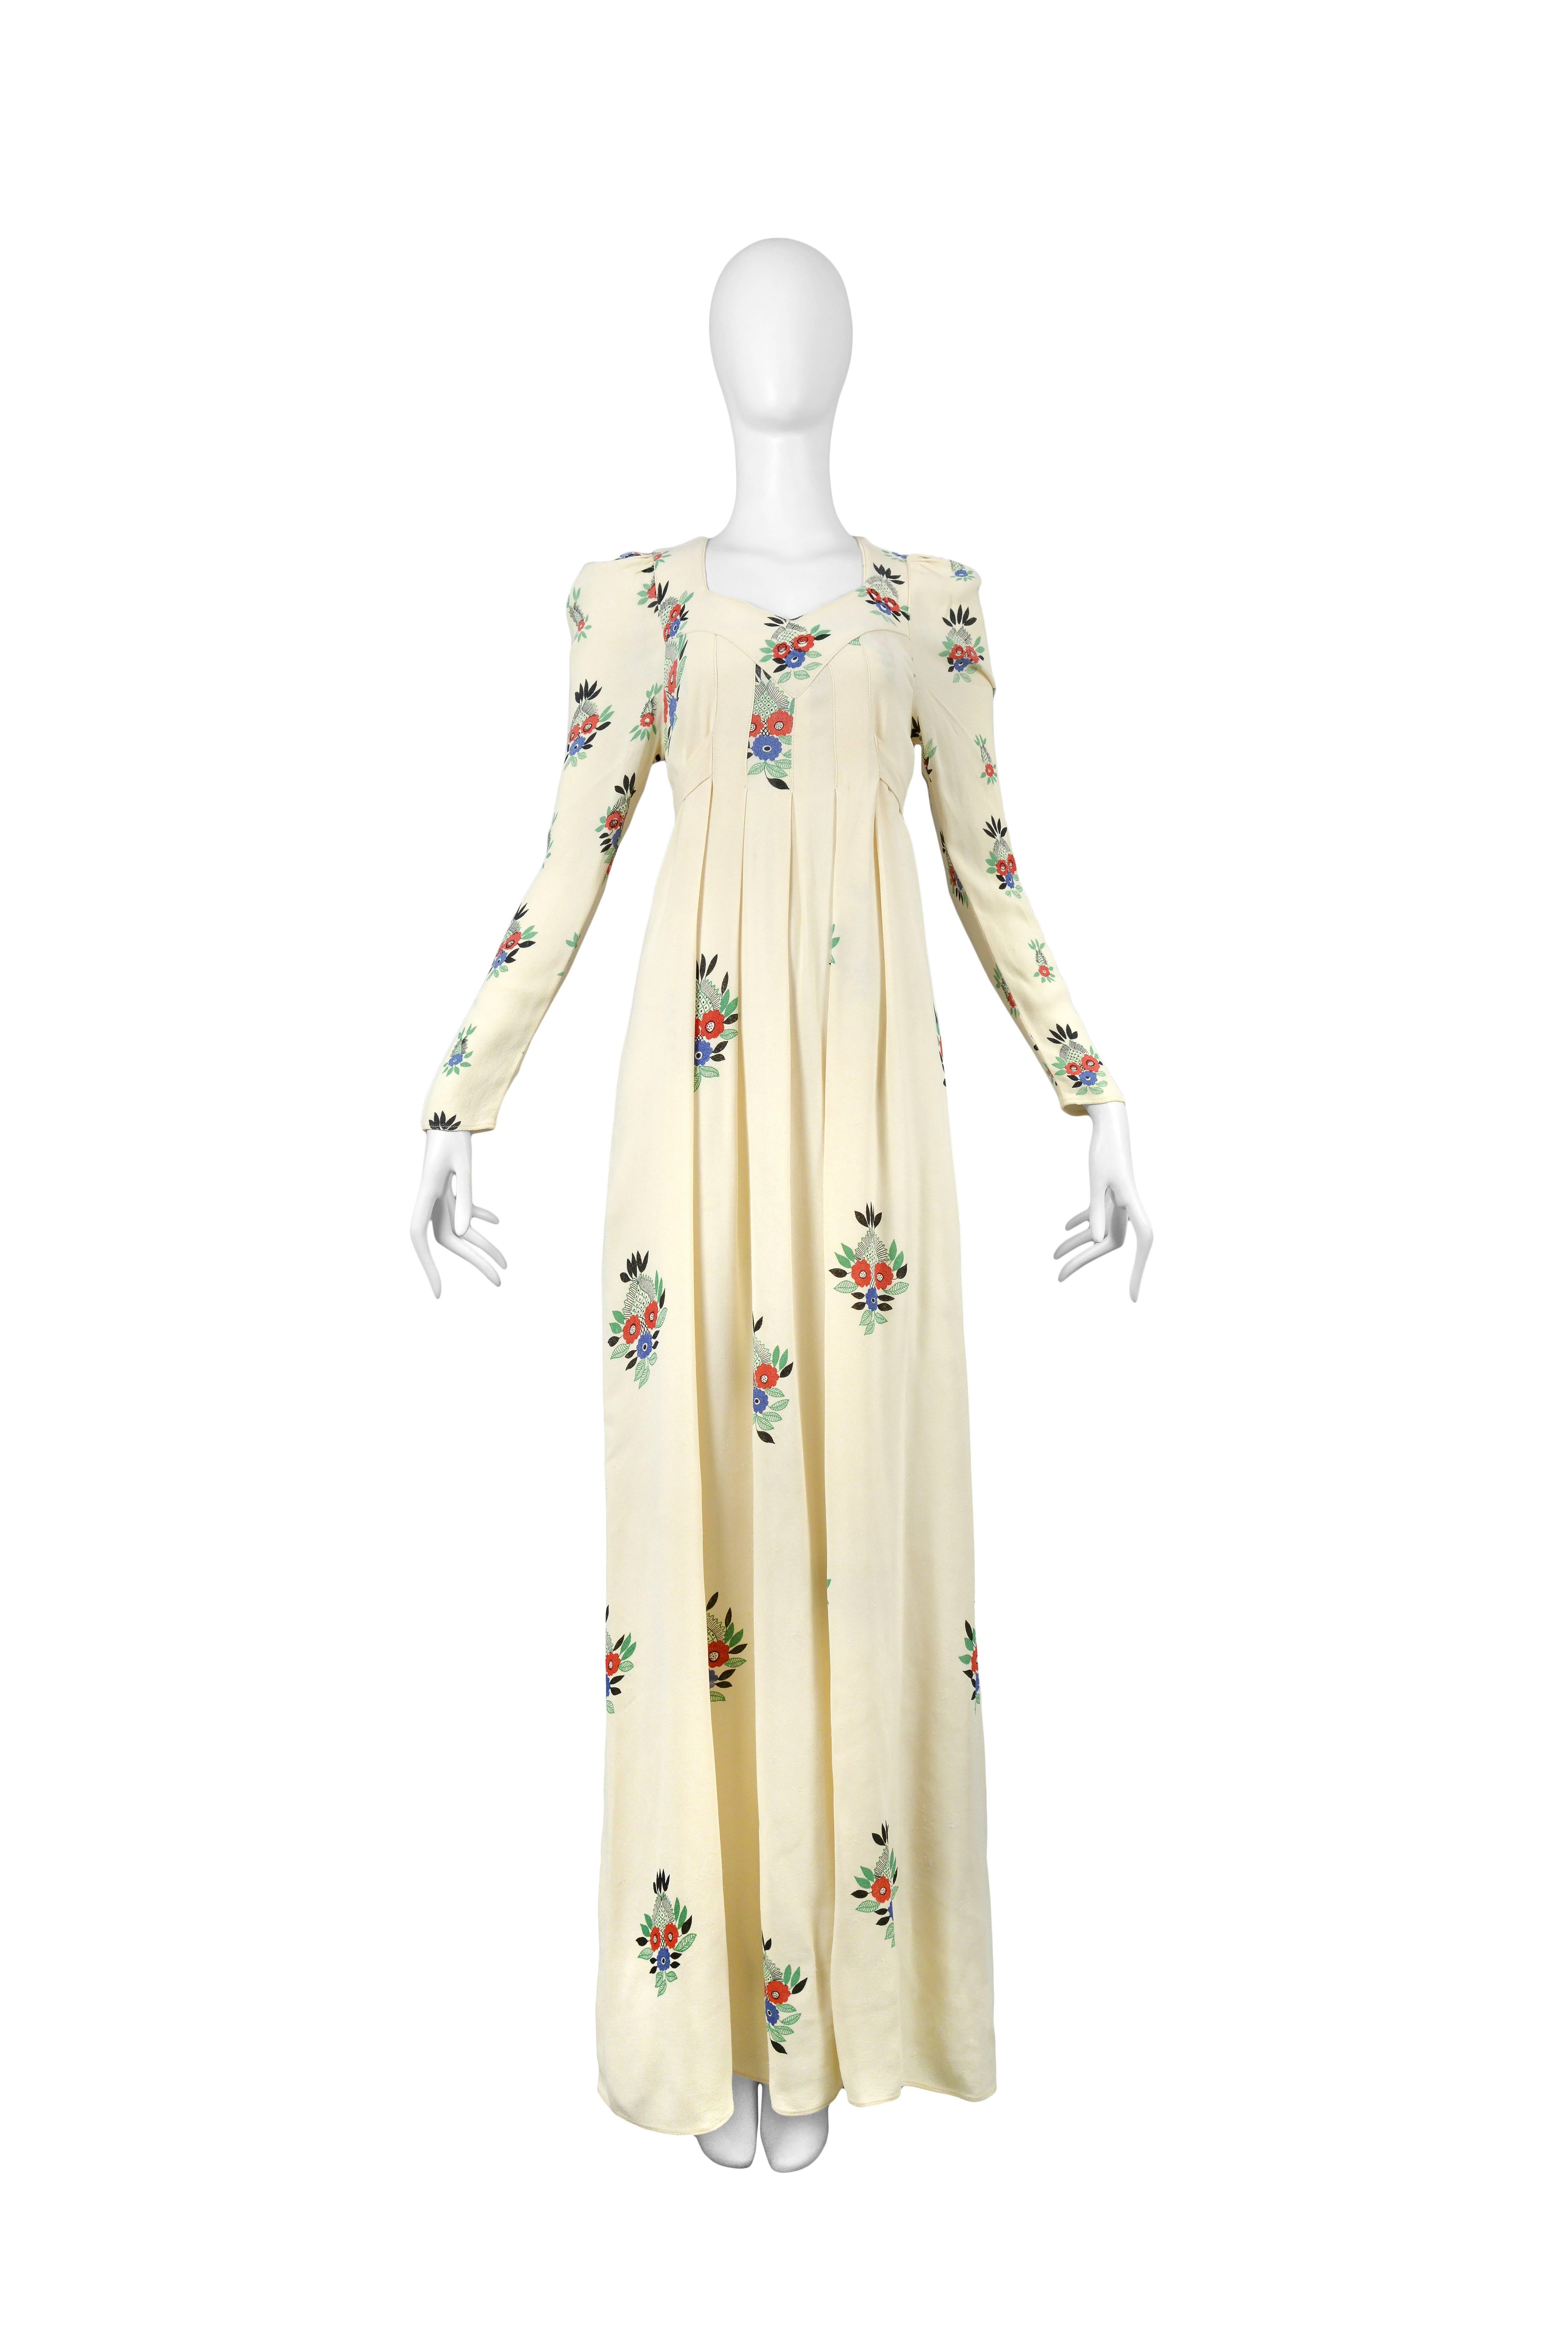 Vintage original Ossie Clark long sleeve moss crepe ivory gown featuring a knife pleated empire waist, a built in sash that ties in the back and an allover red, blue and green floral bouquet print by famed textile designer Celia Birtwell. One Ossie